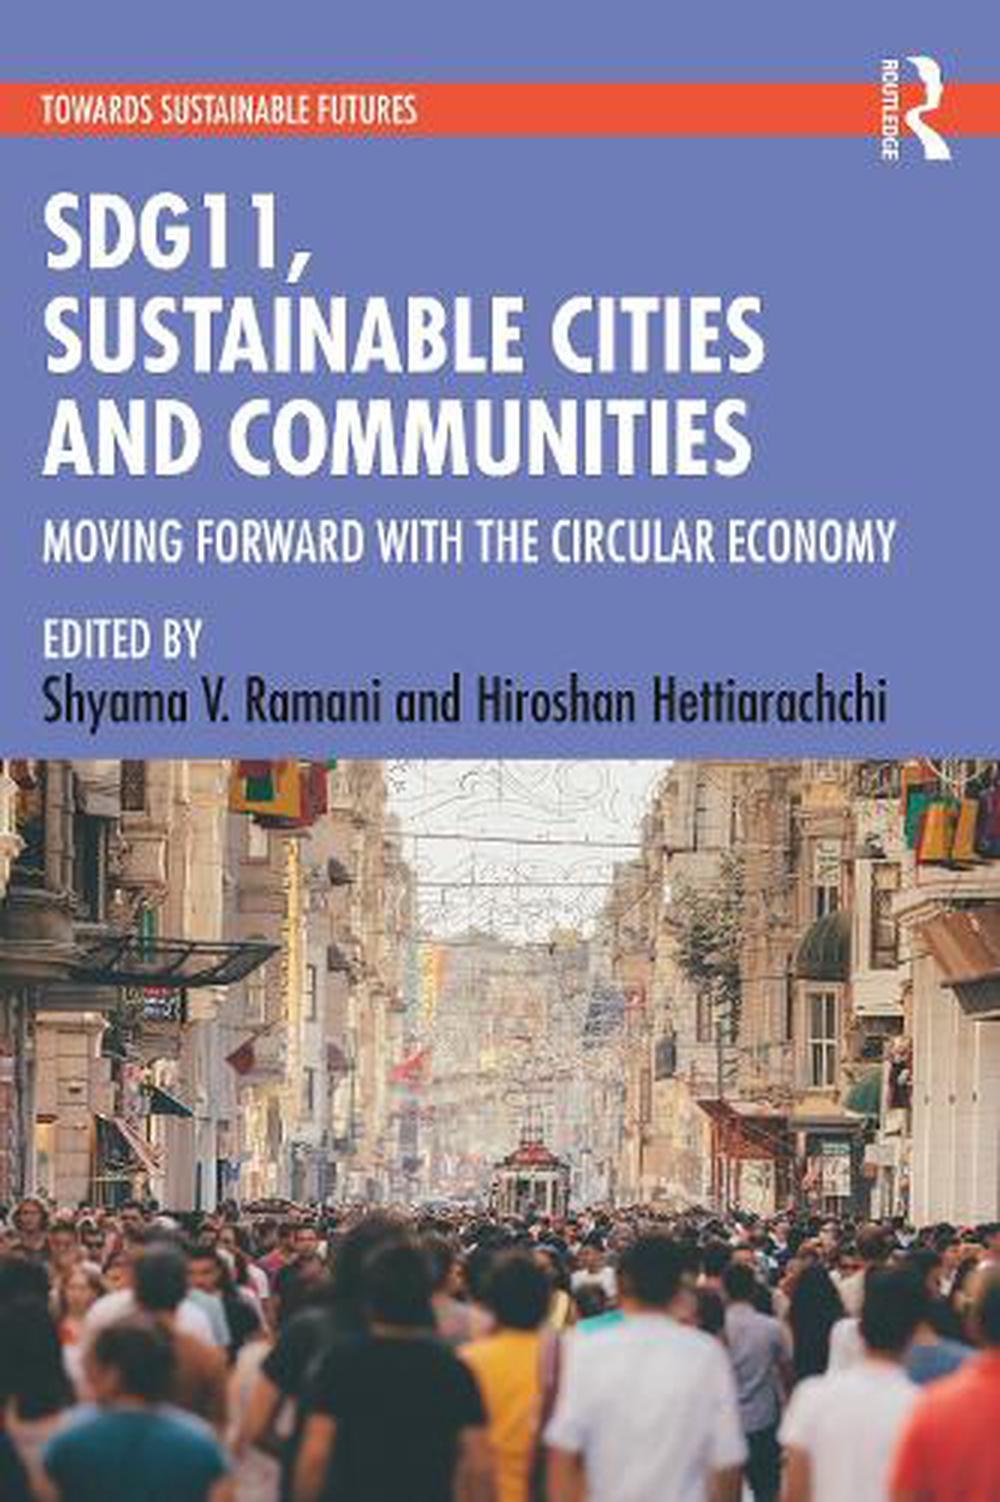 research paper about sustainable cities and communities